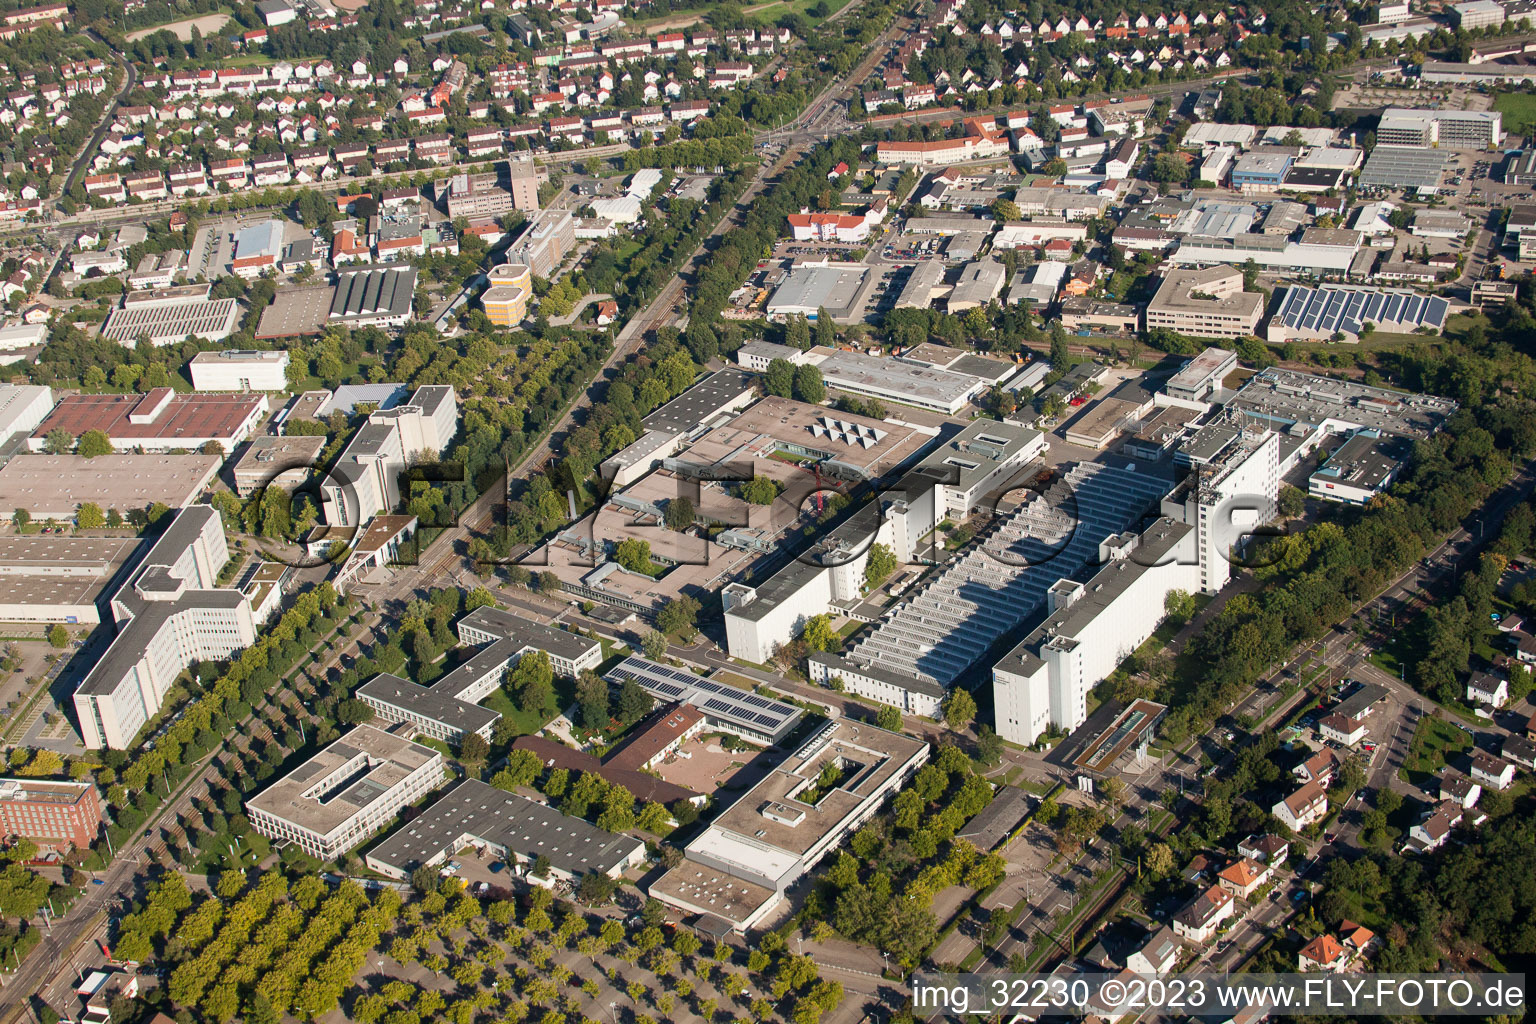 Siemens AG in the district Knielingen in Karlsruhe in the state Baden-Wuerttemberg, Germany